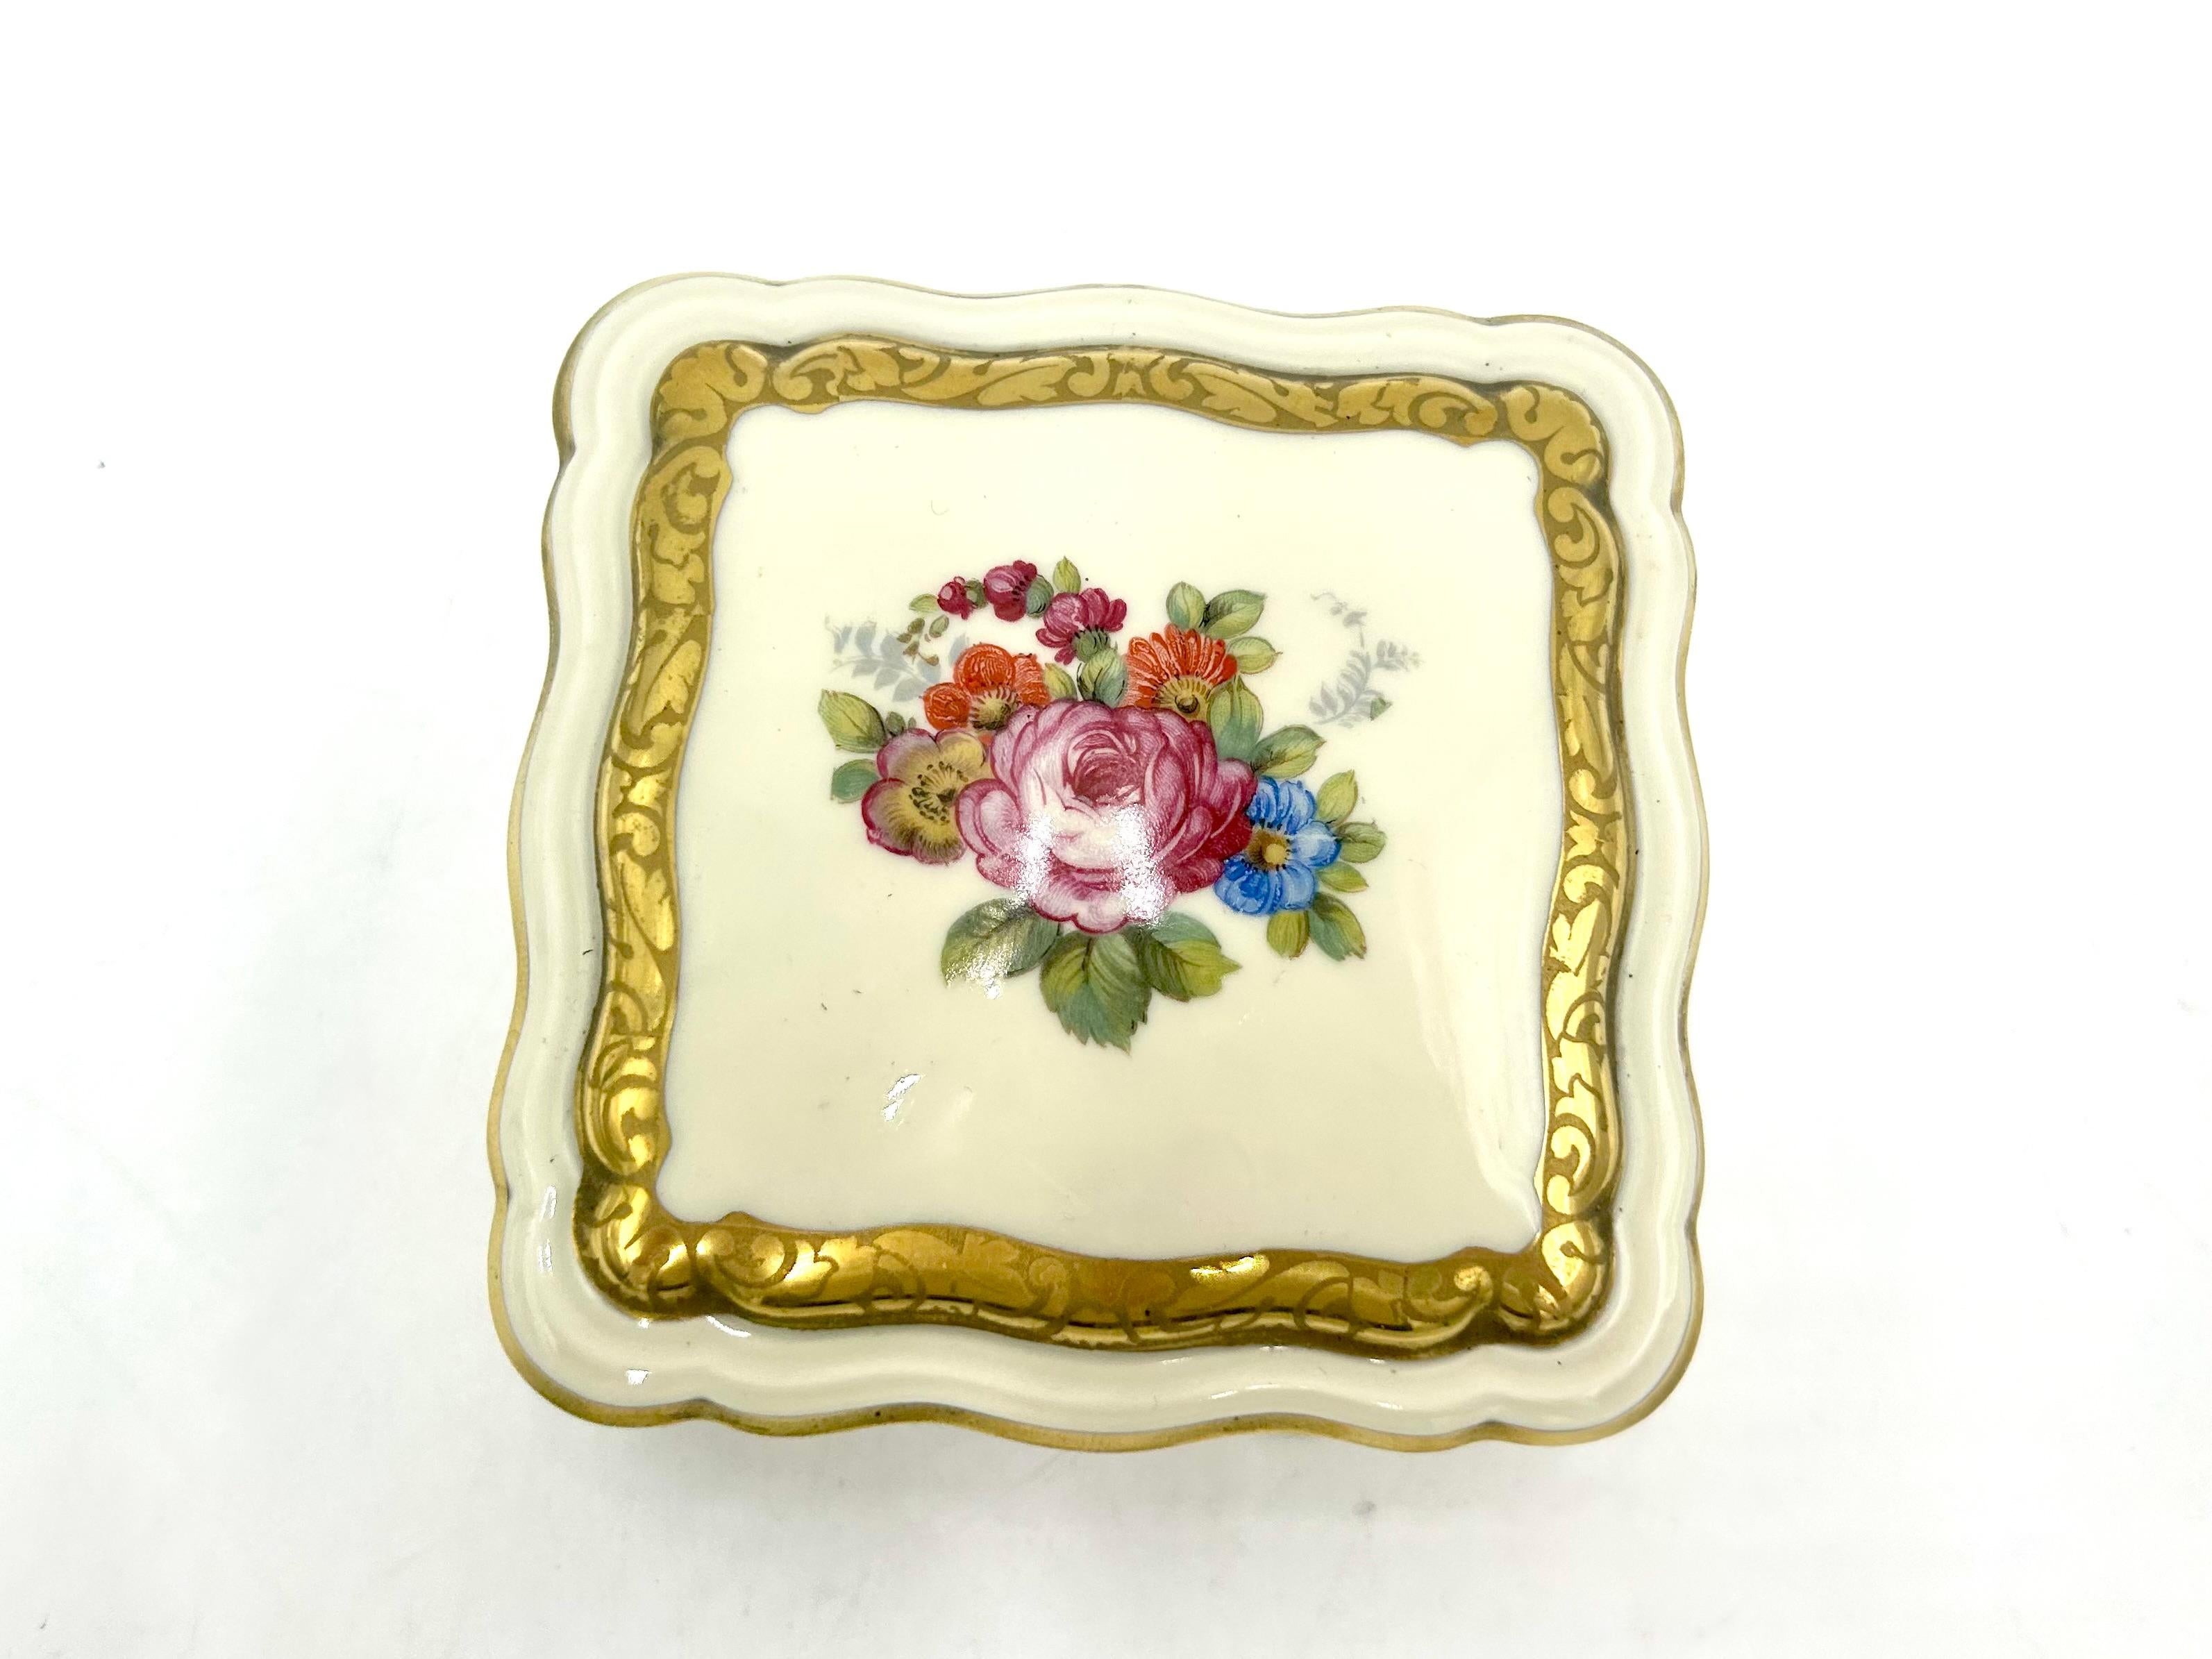 Porcelain casket - a box for jewelry and trinkets.

Ivory-colored porcelain decorated with gilding and a floral bouquet motif.

A product of the renowned German manufacturer Rosenthal. Chippendale series. Marked with a mark from 1942.

Very